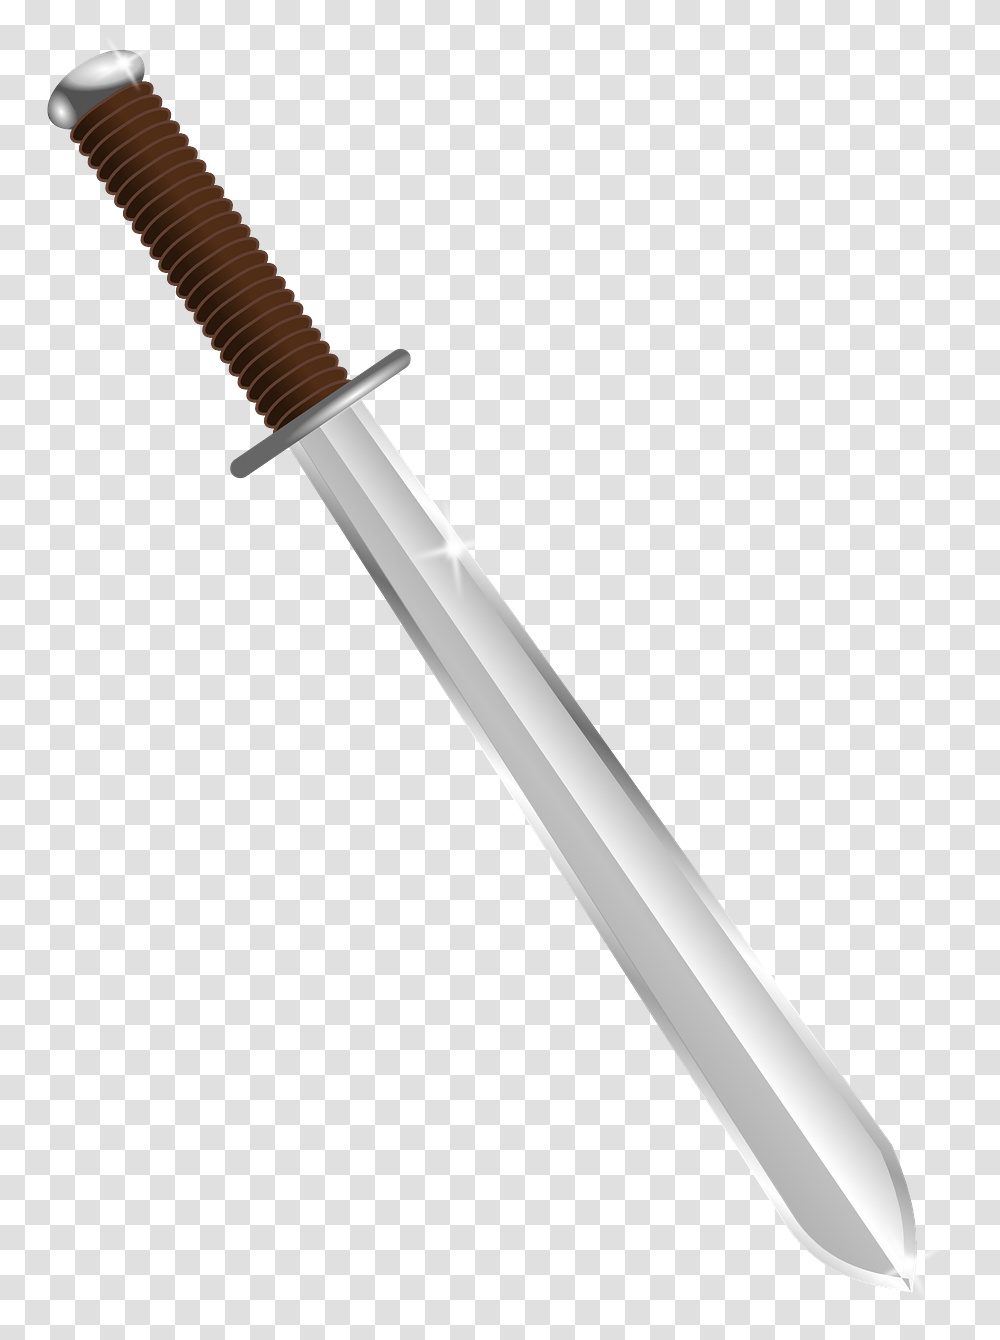 Straight Edged Spatula Definition, Sword, Blade, Weapon, Weaponry Transparent Png